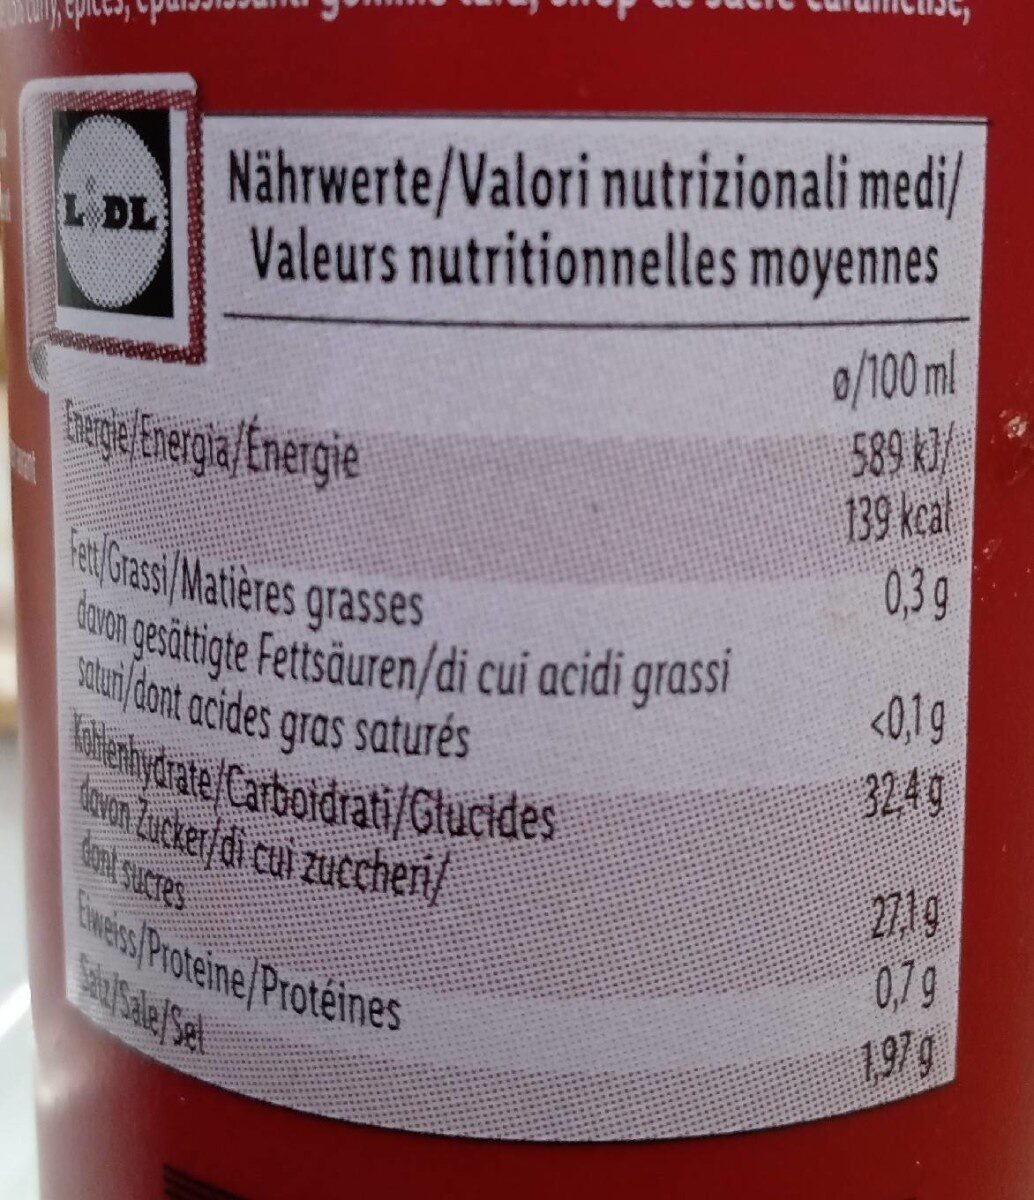 Ketchup curry - Hot - Nutrition facts - fr